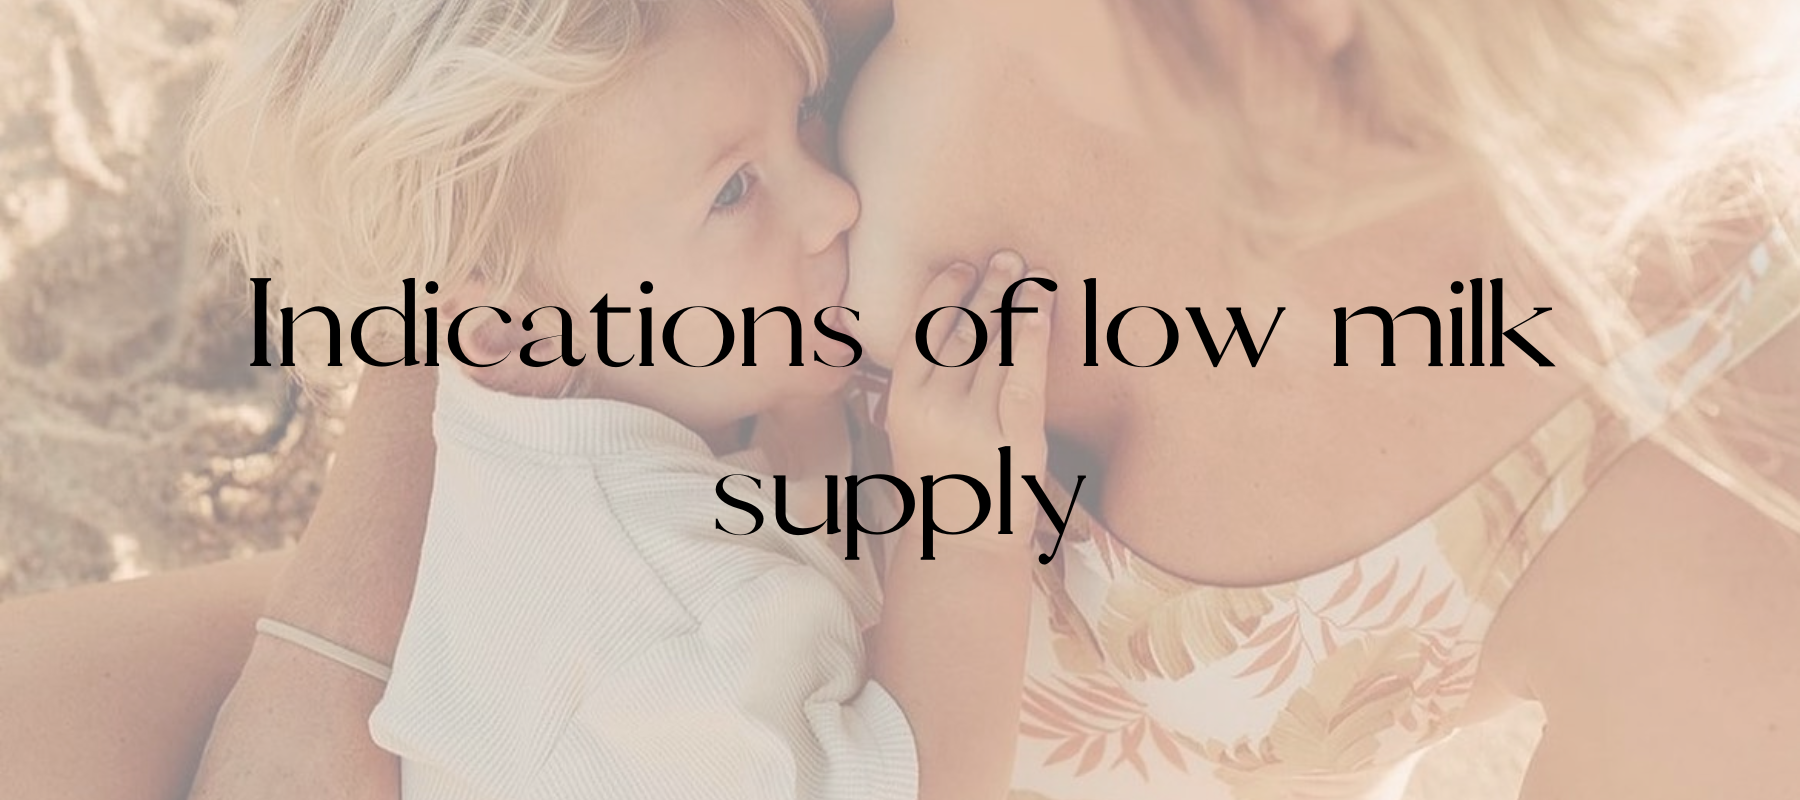 Indications of low milk supply